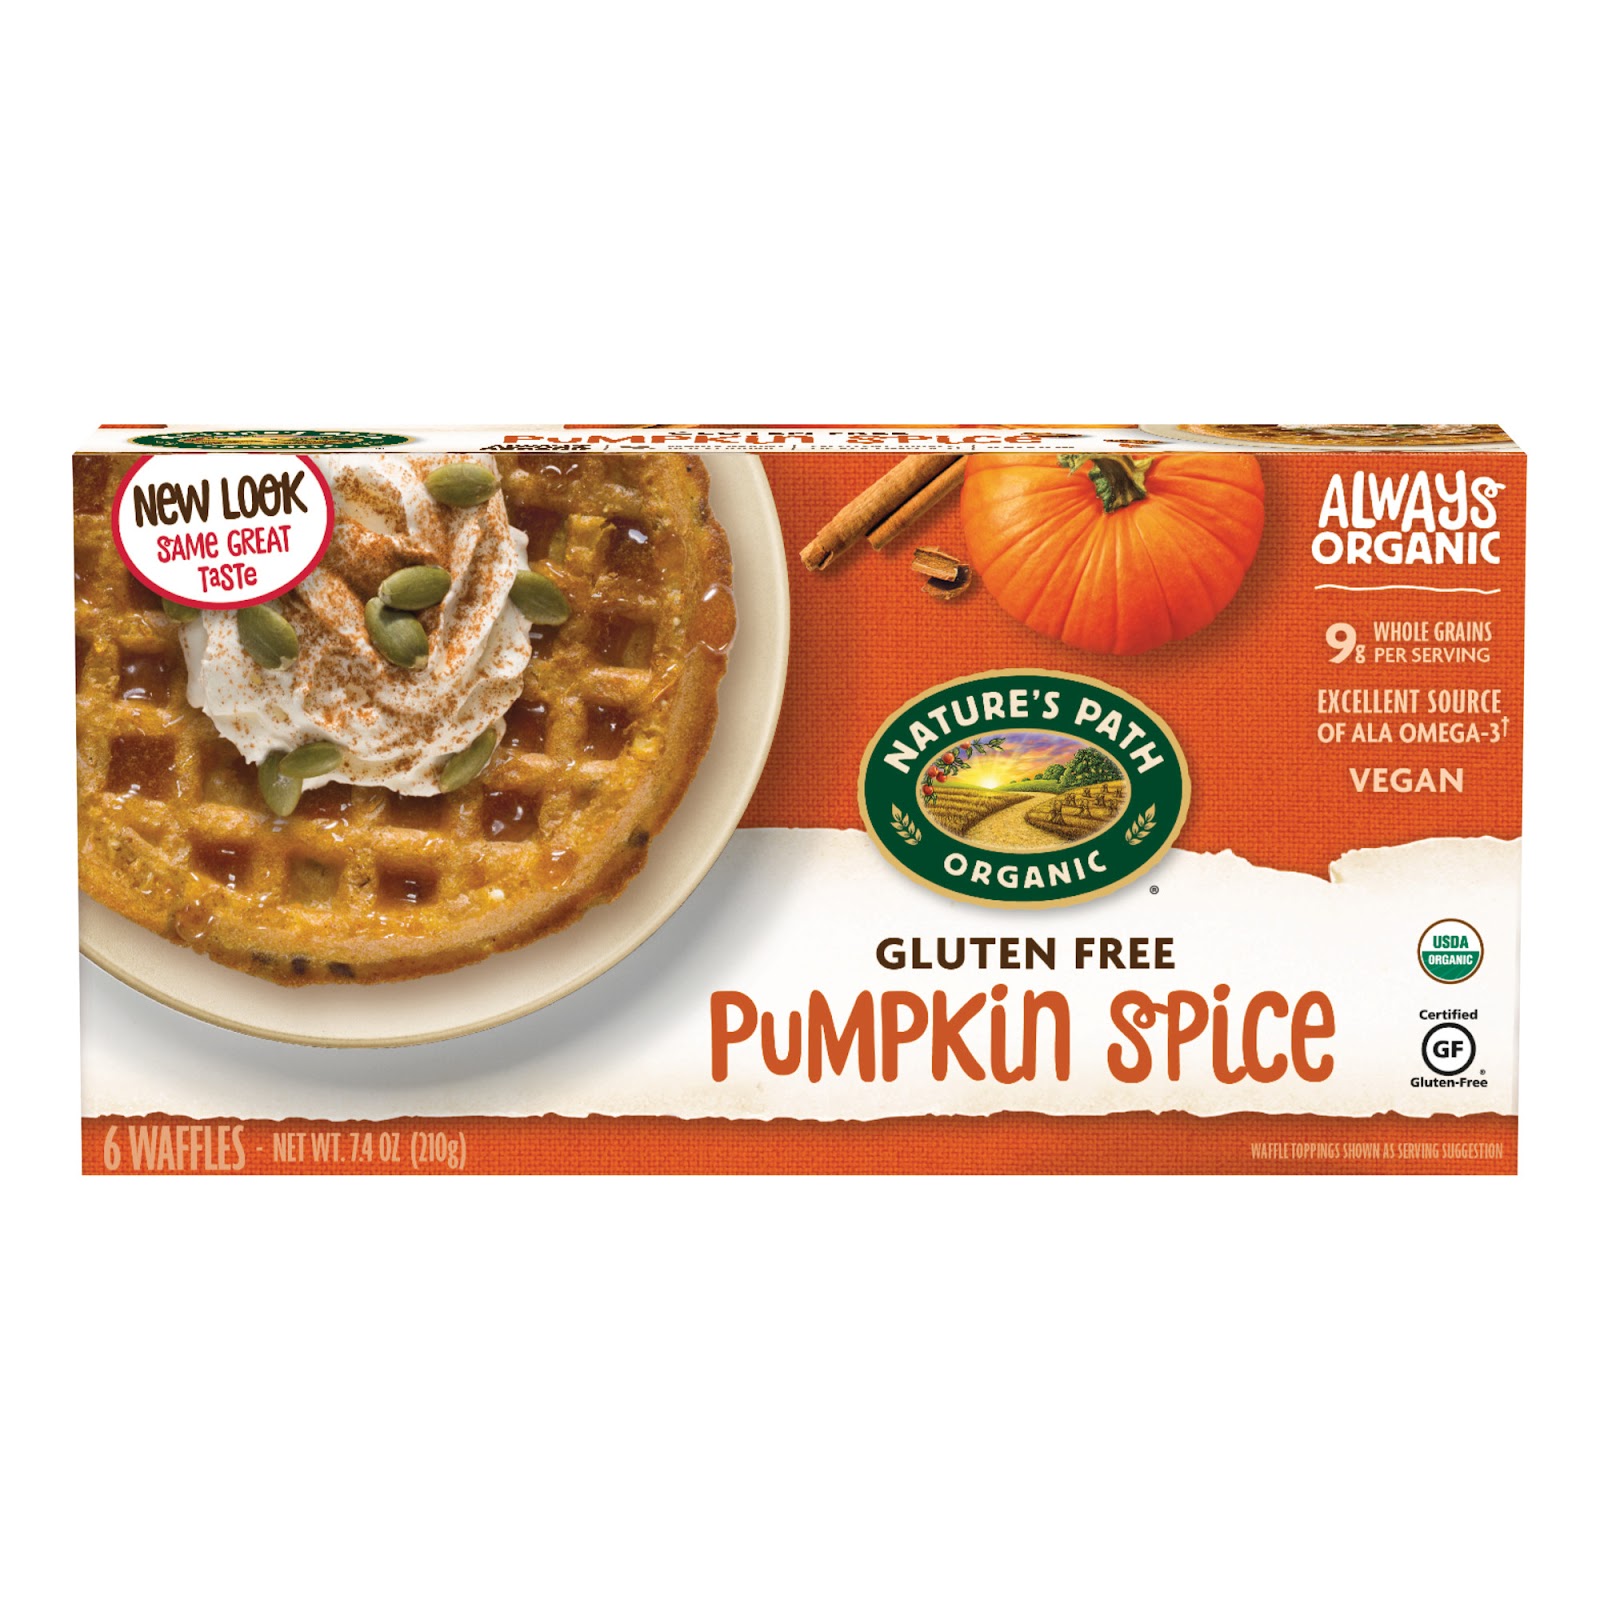 Evergreen™ Launches New Look for Frozen Waffle Packaging